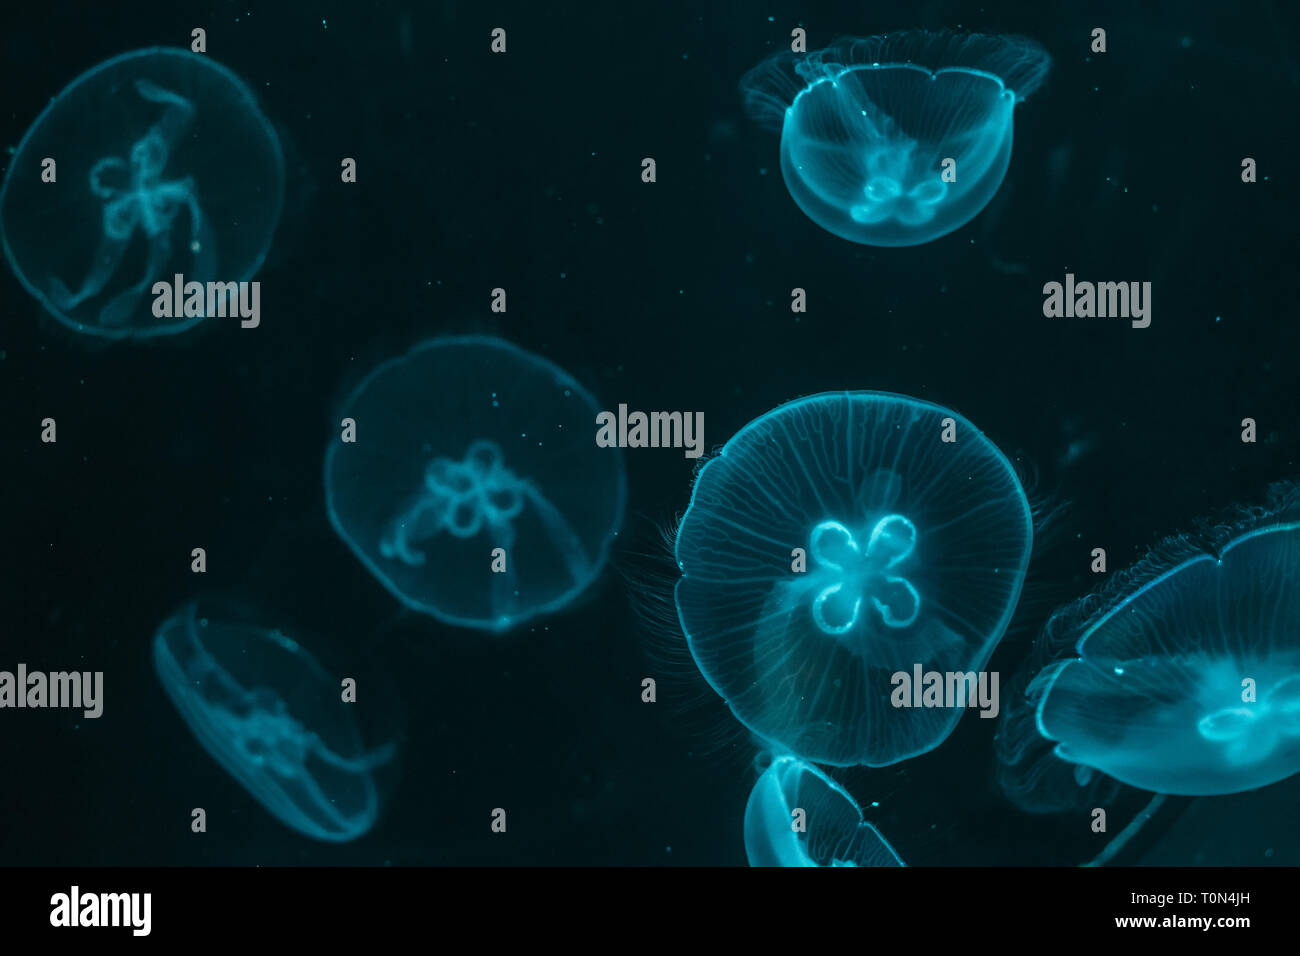 Glowing jellyfish close-up in the aquarium blue color. Stock Photo